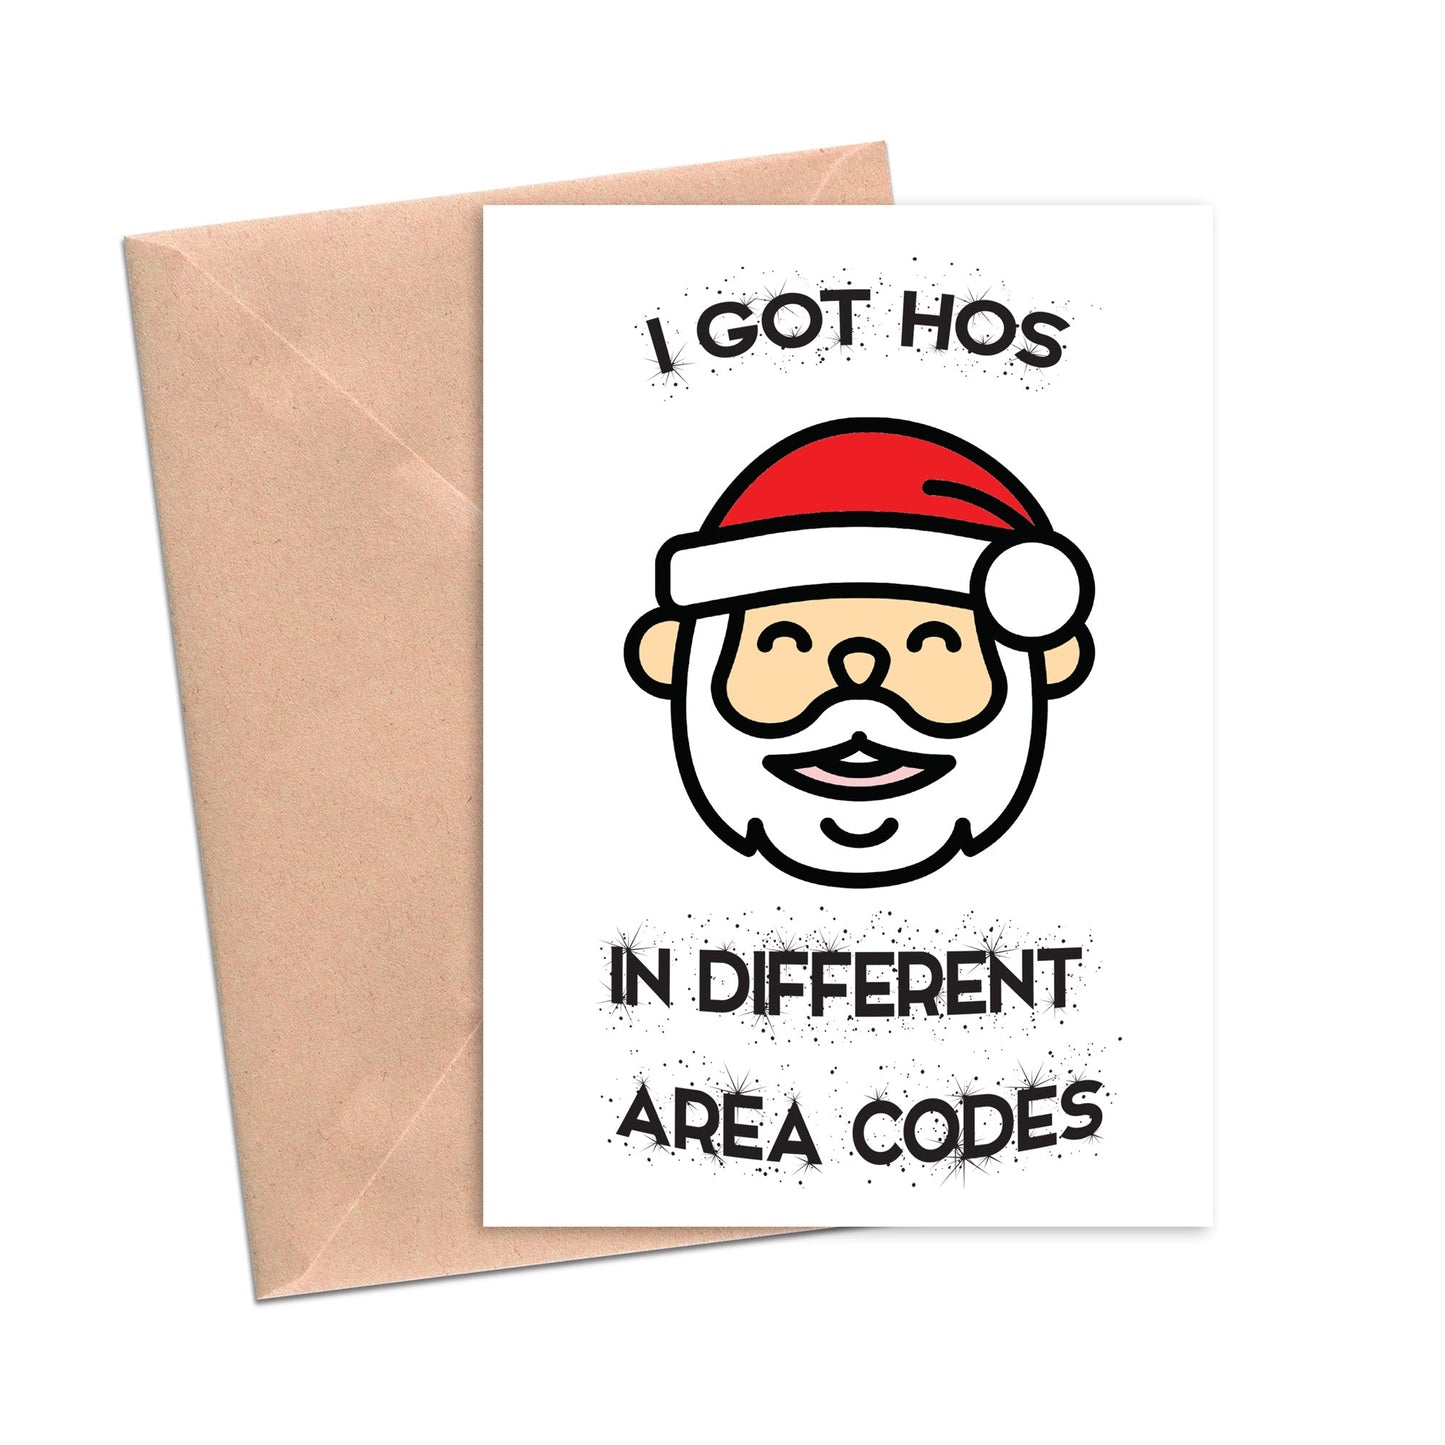 Hoes in Different Area Codes Christmas Funny Holiday Card-Holiday Cards-Crimson and Clover Studio